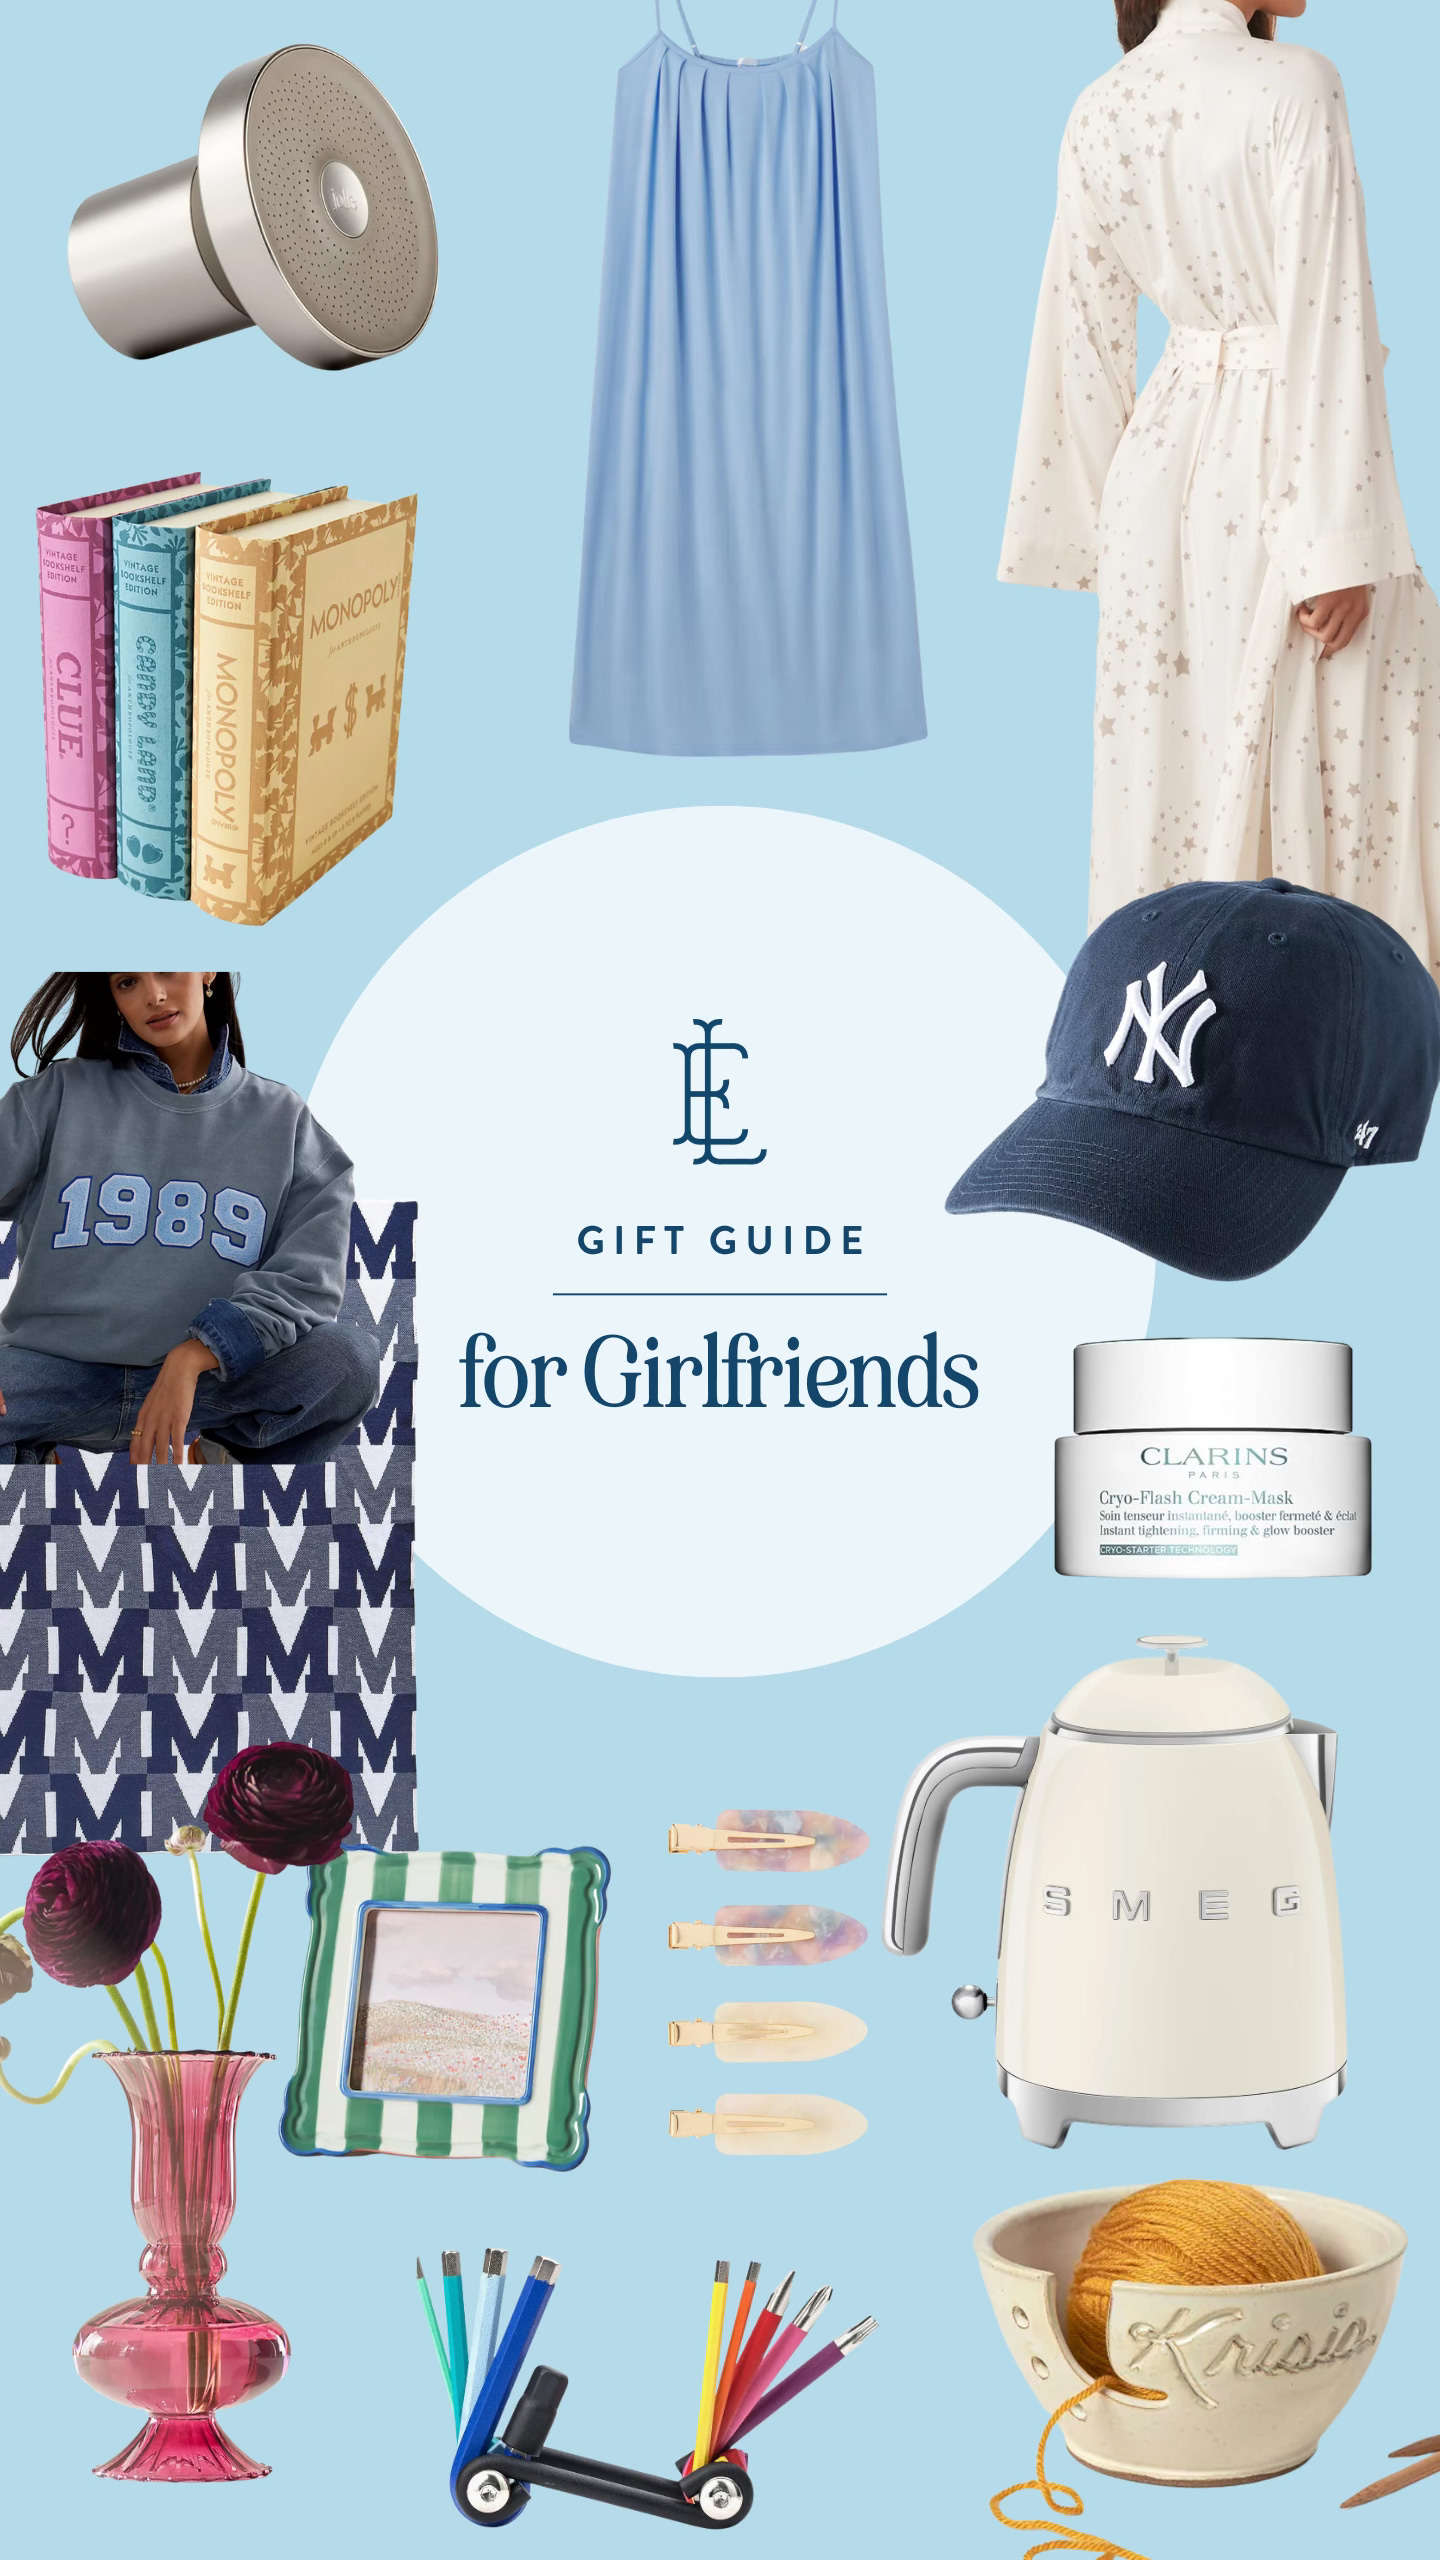 Gift Guide for Young Adults – Women - The Idea Room